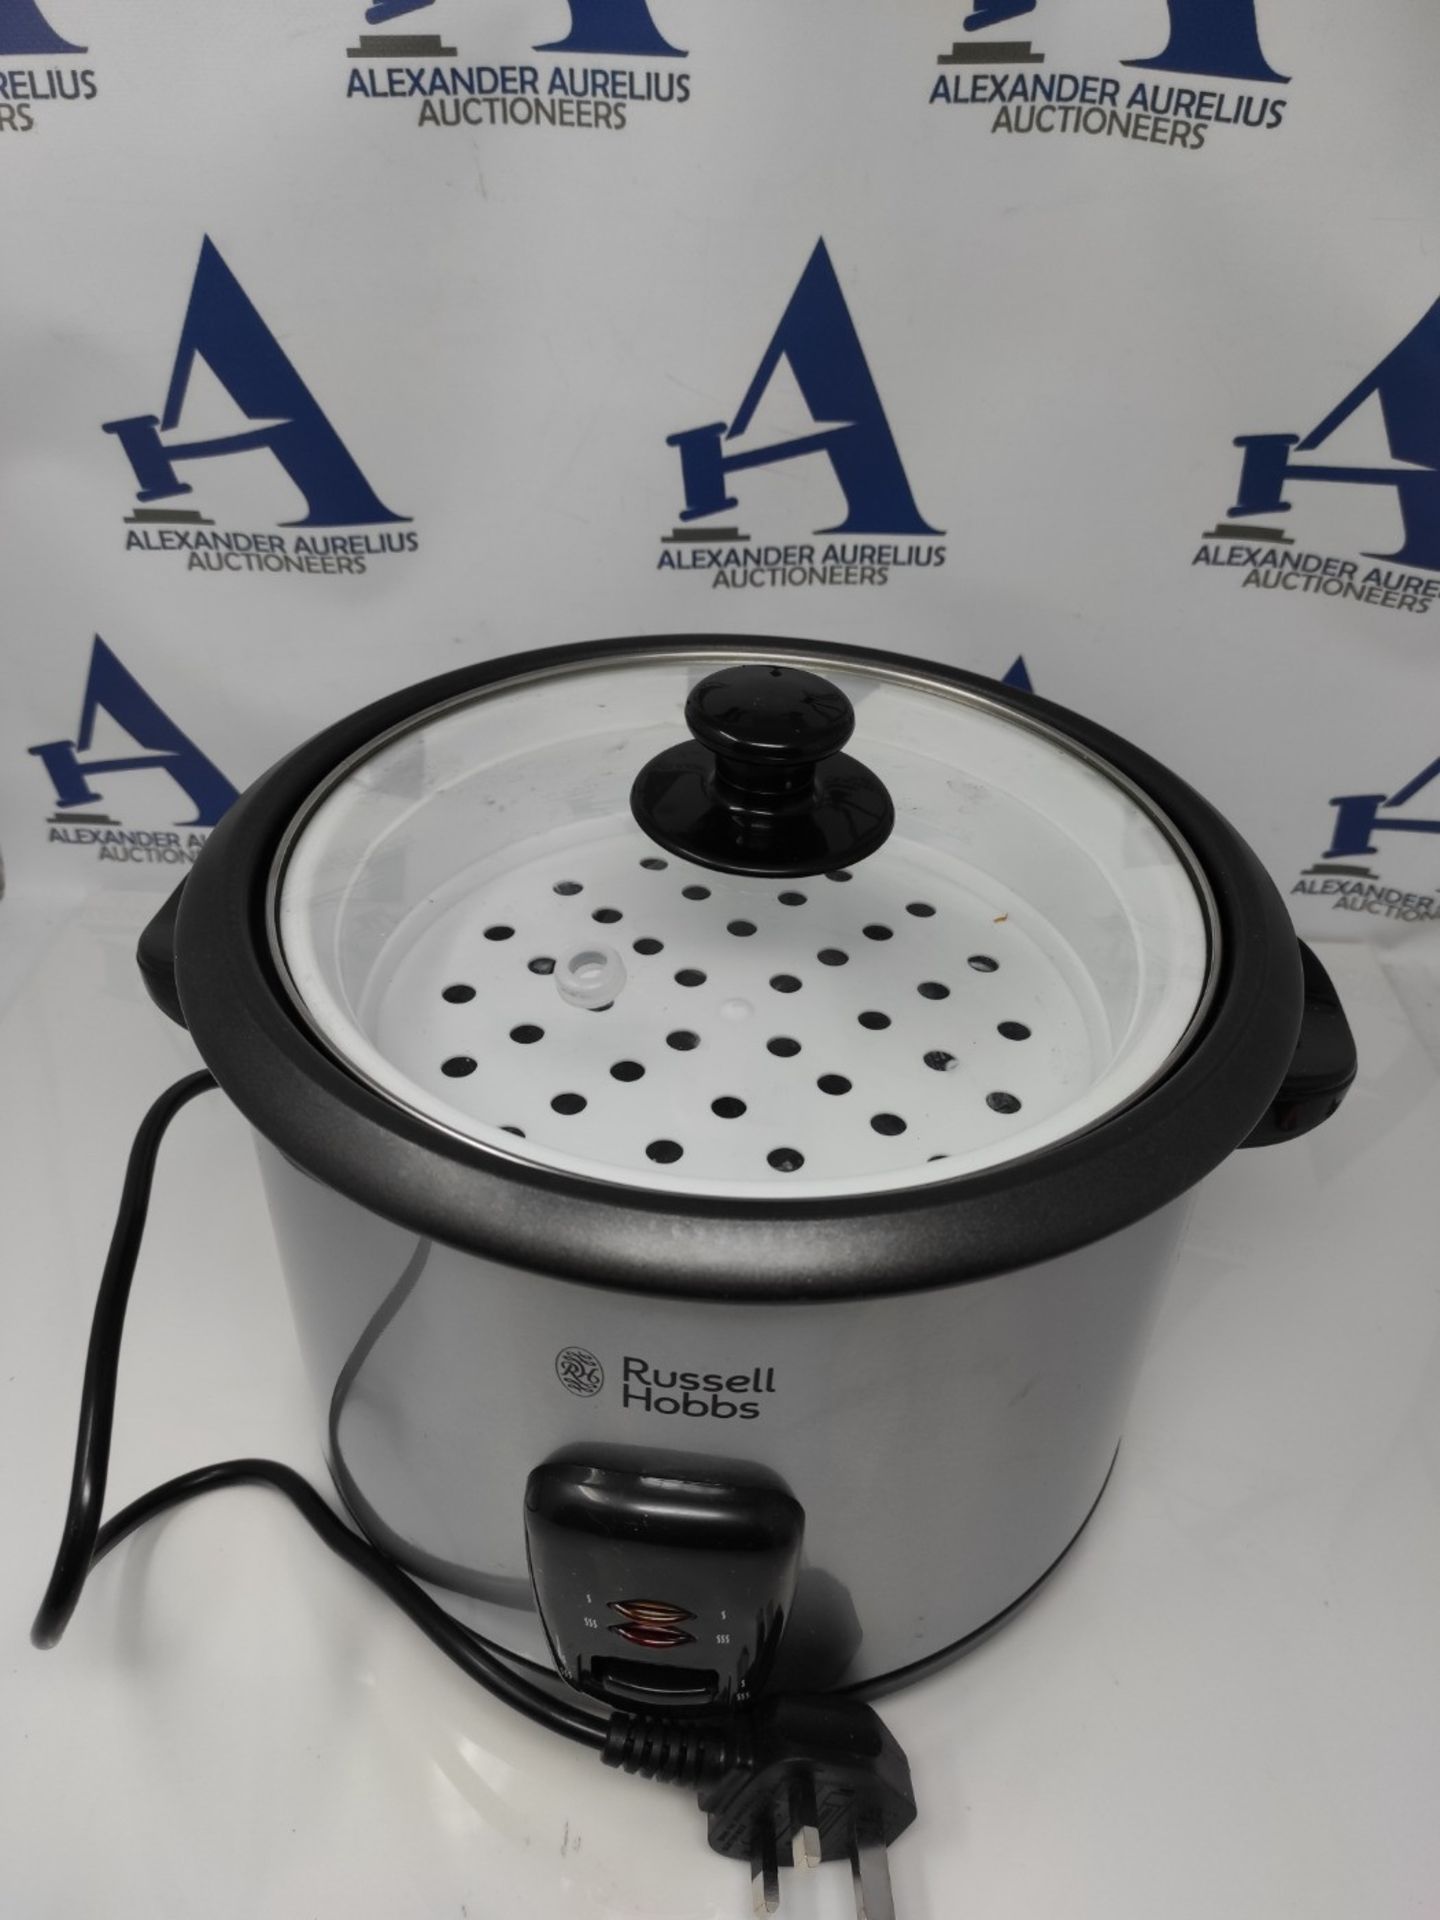 Russell Hobbs Electric Rice Cooker & Steamer - 1.8L (10 cup) Keep warm function, Remov - Image 3 of 3